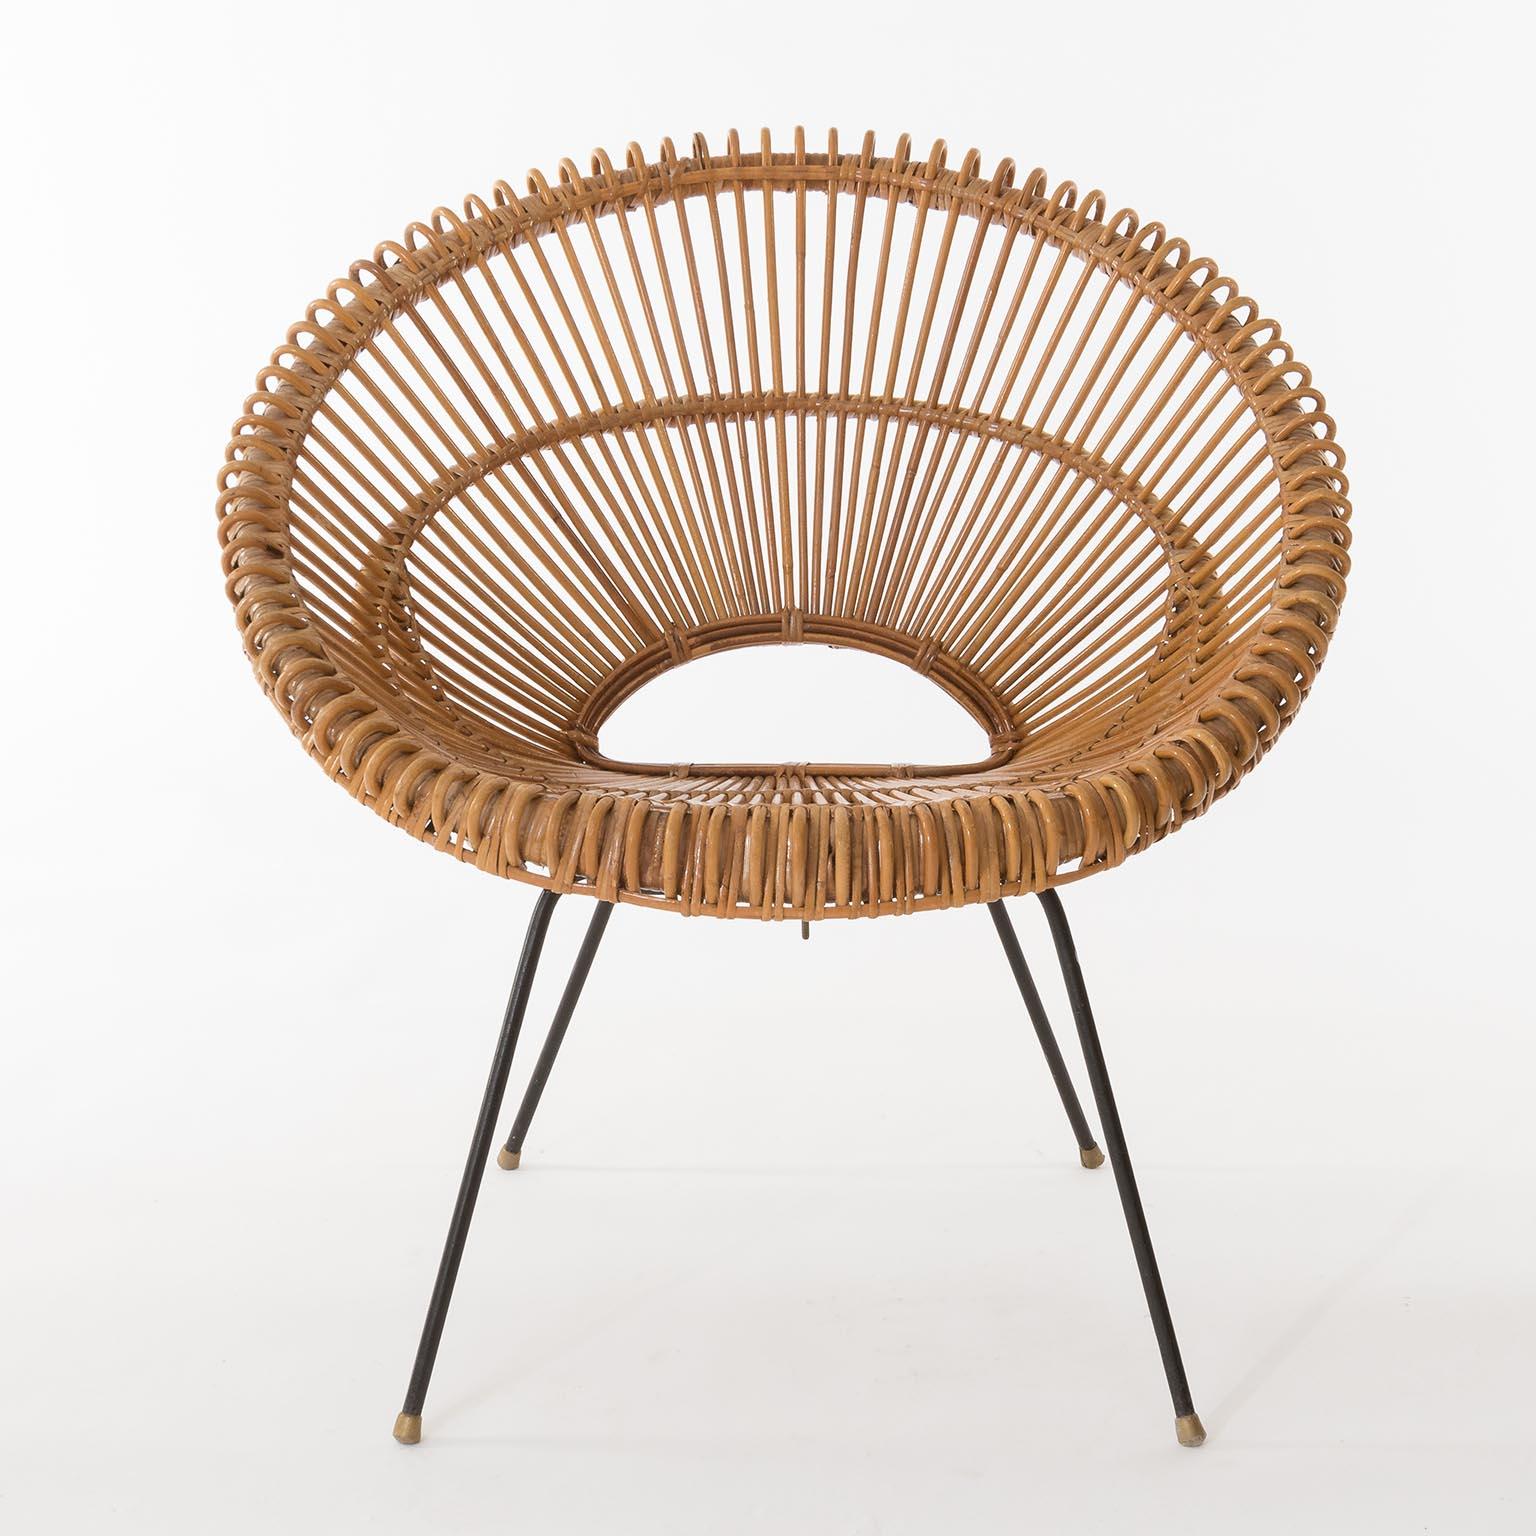 Pair of Mid-Century Modern Rattan Bamboo Chairs, Janine Abraham, Dirk Rol, 1960s In Good Condition For Sale In Hausmannstätten, AT